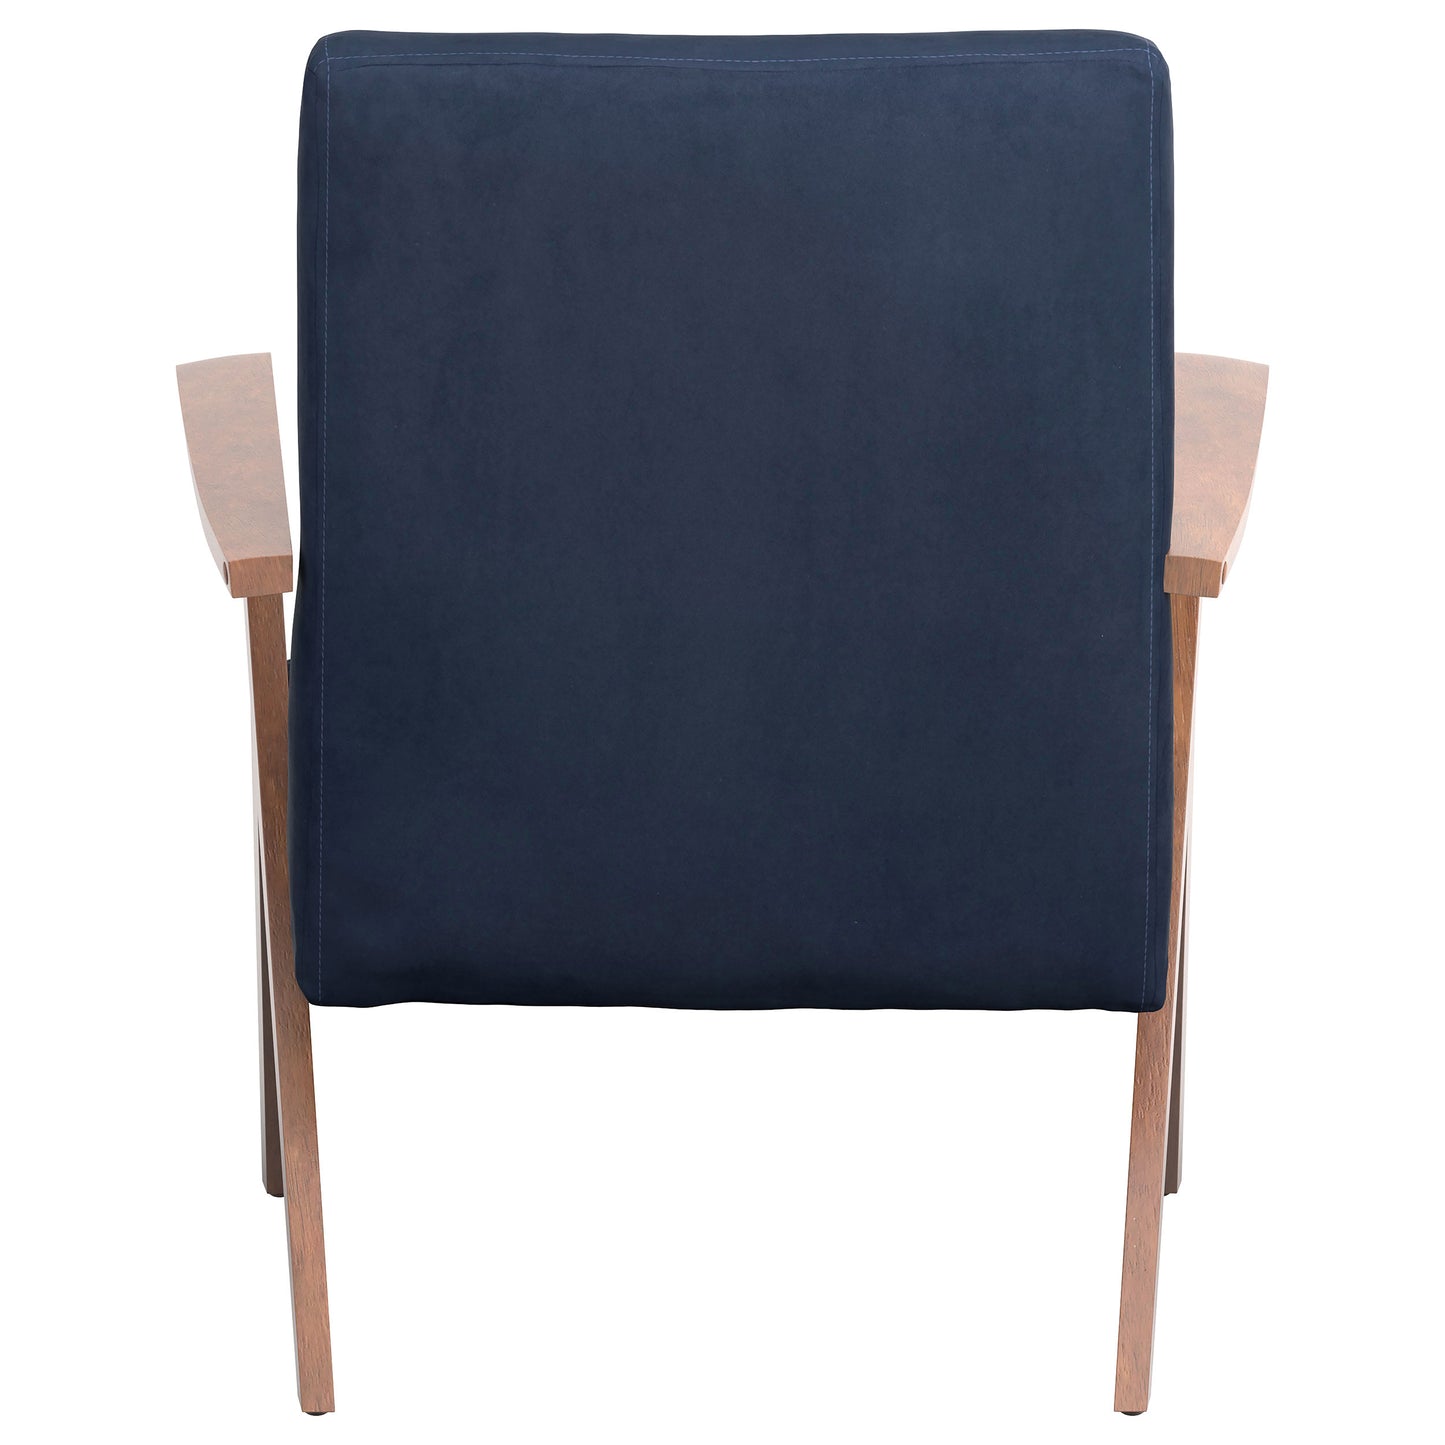 Cheryl Wooden Arms Accent Chair Dark Blue and Walnut